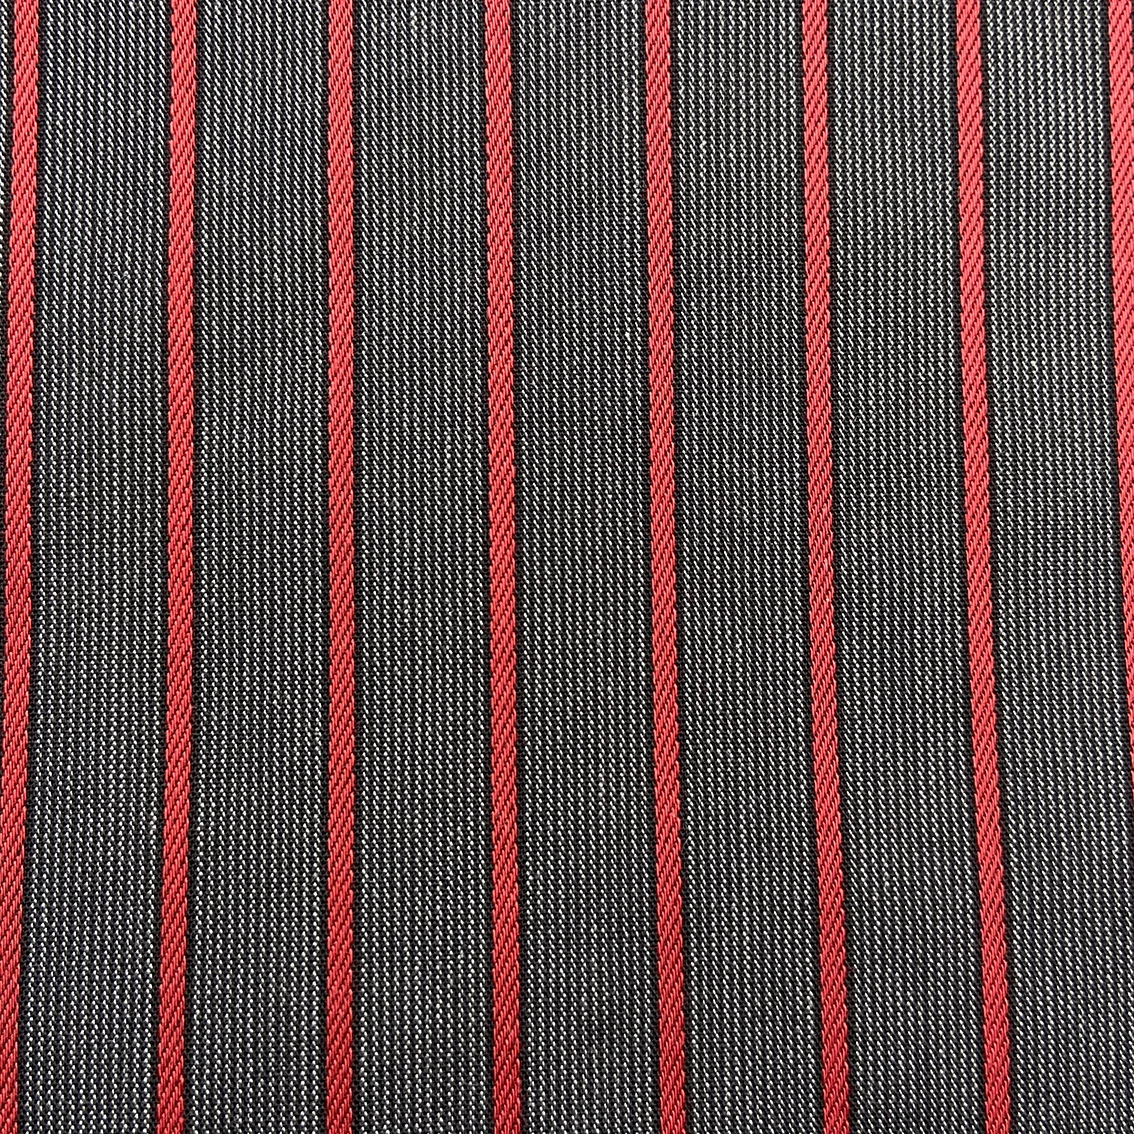 2021 New Top Quality Organic 100% Pure Cotton Dobby Stripe Soft Finish Fabric For Shirt